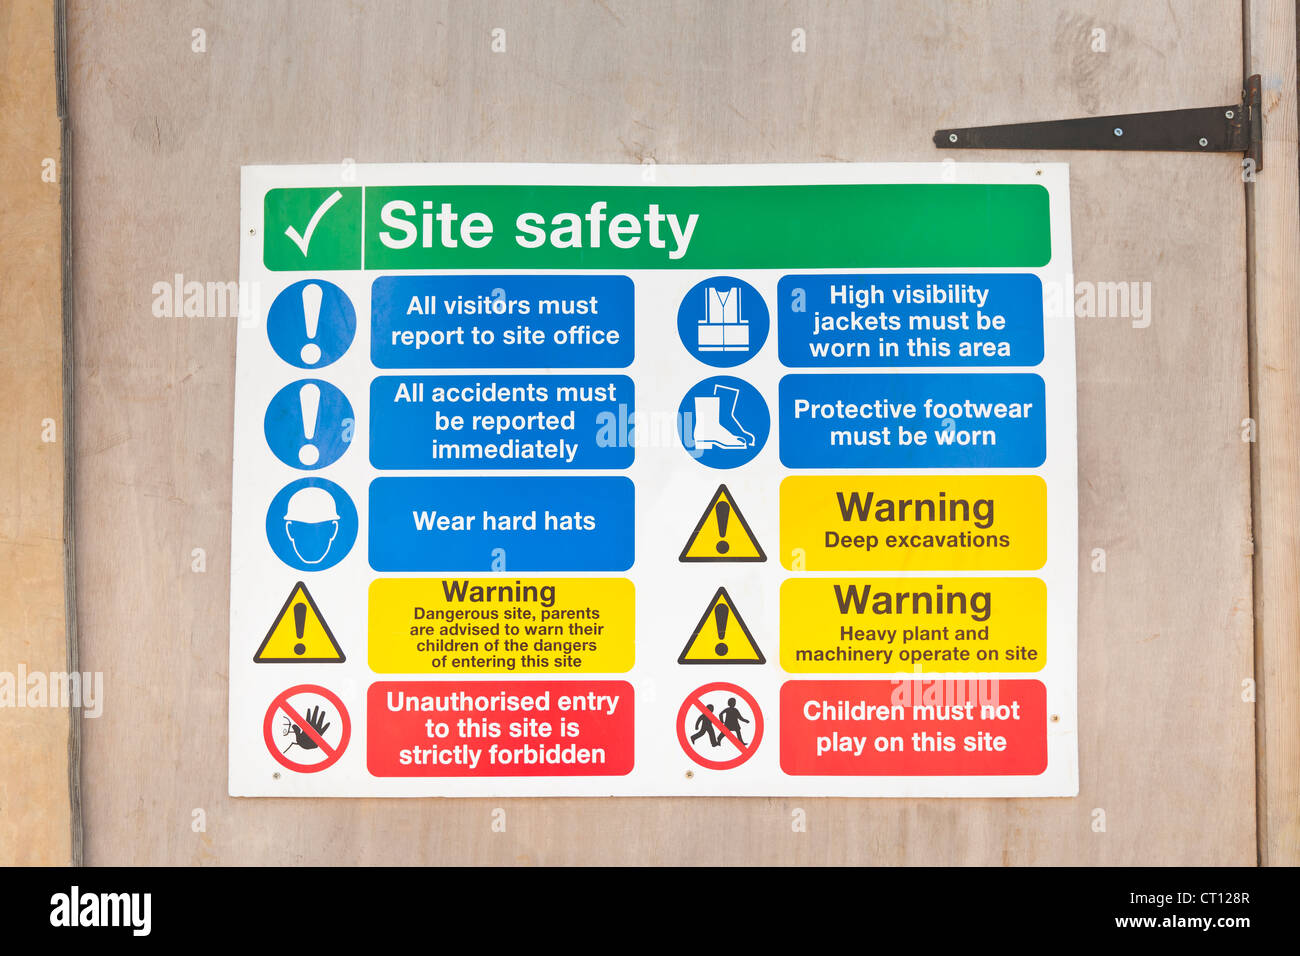 Health and safety notice at building site, England Stock Photo